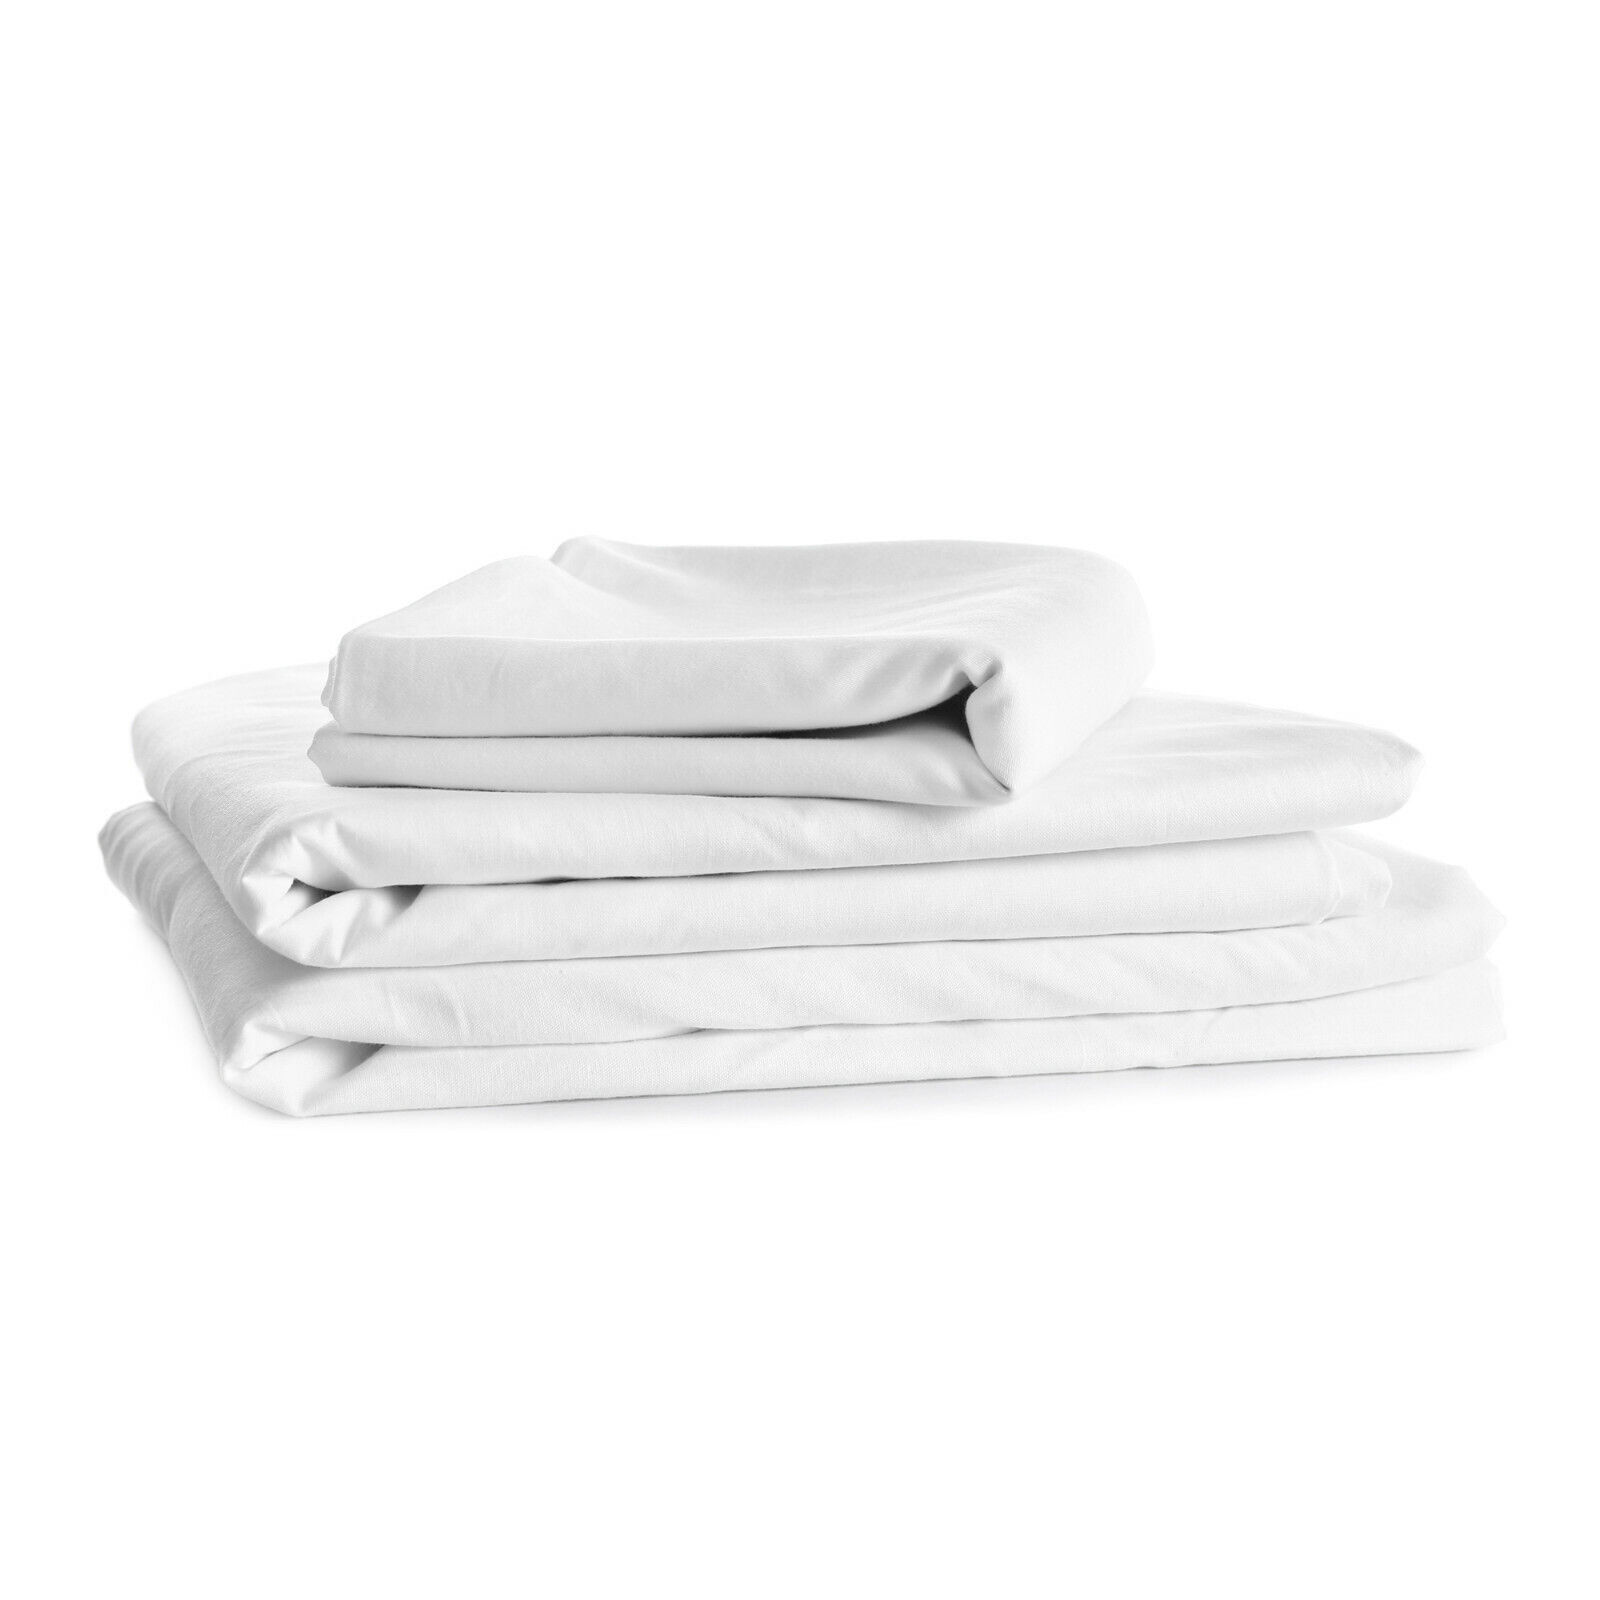 Twin Size Bed Sheets Egyptian Cotton Feel 1800 Count Set 3 Piece Bed Sheet Set